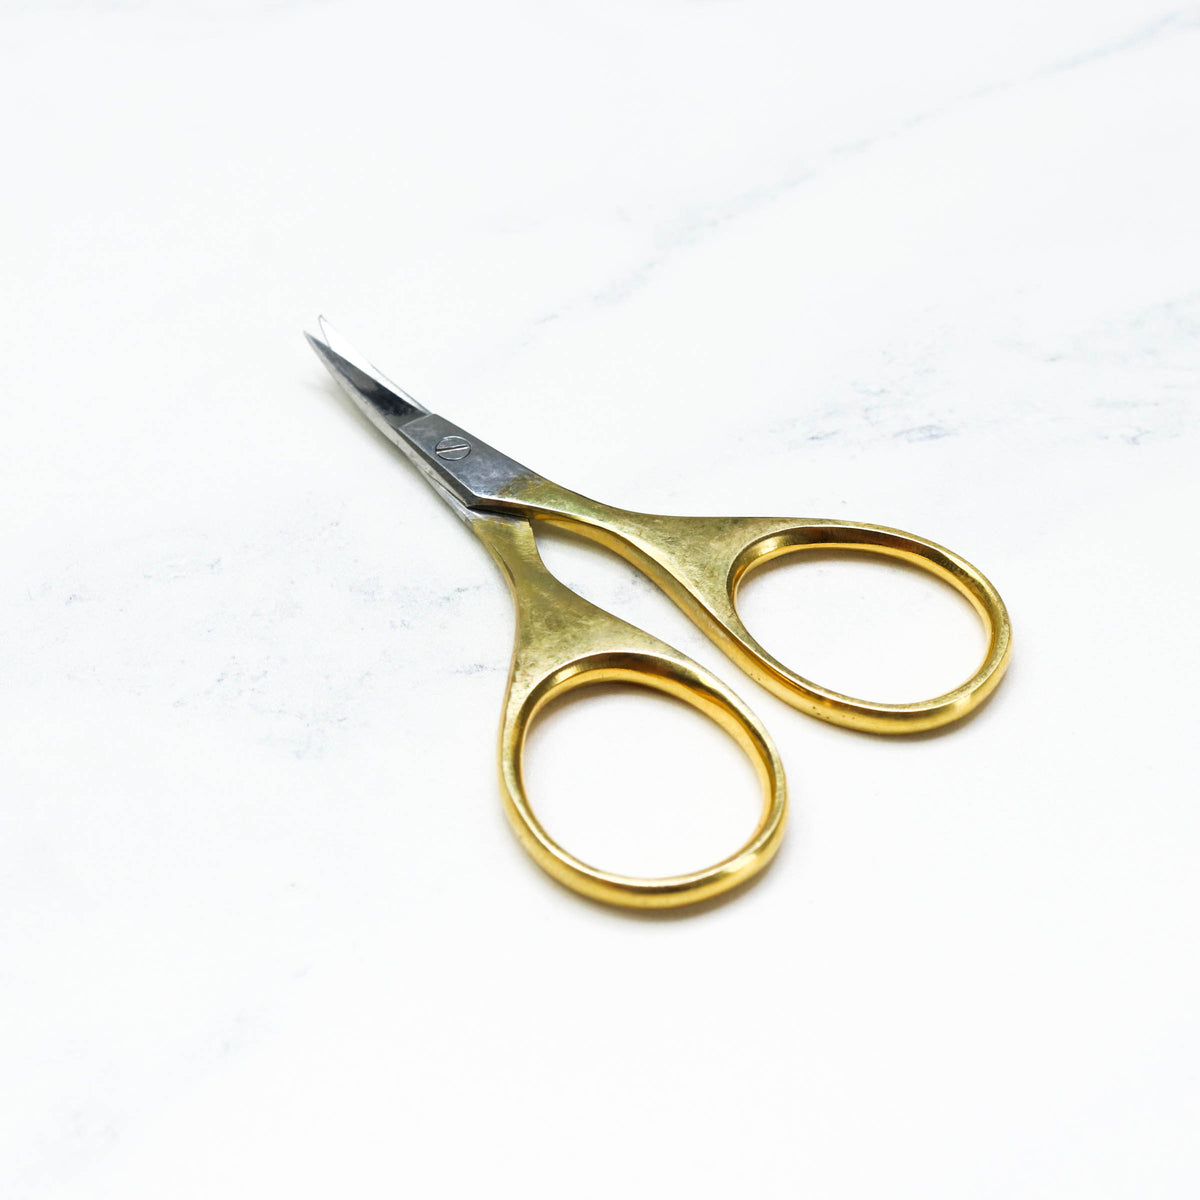 Gold Curved Blade Embroidery Scissors